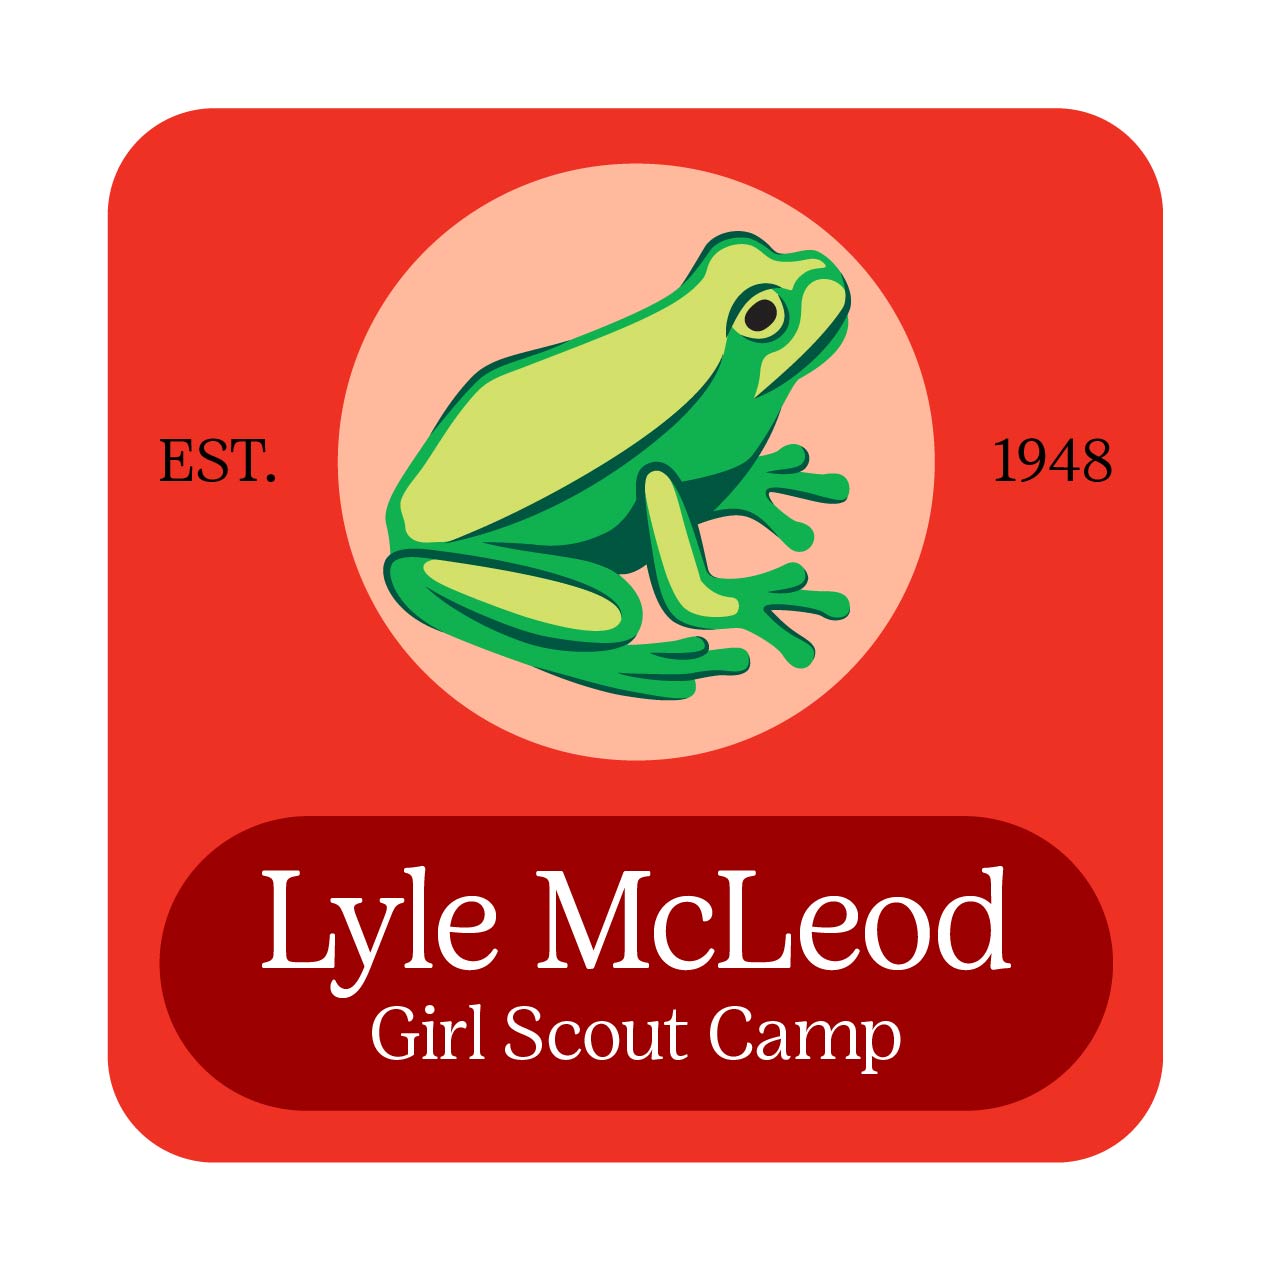 An illustration of a green frog is set against a red square shape. White text reads, "Lyle McLeod Girl Scout Camp." Black text reads, "Est. 1948."